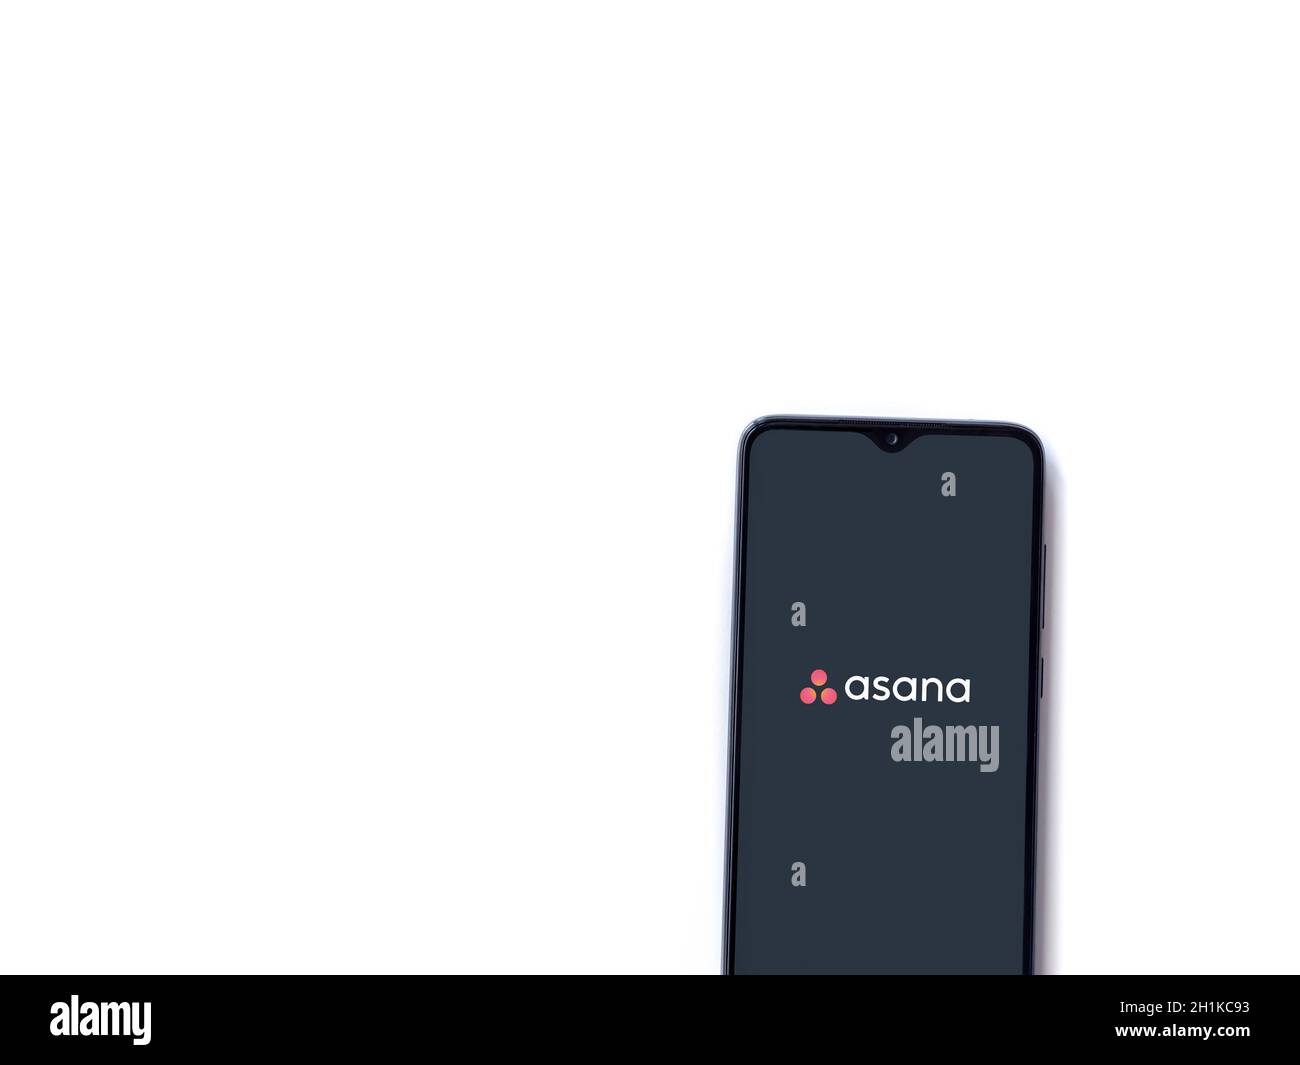 Lod, Israel - July 8, 2020: Asana app launch screen with logo on the display of a black mobile smartphone isolated on white background. Top view flat Stock Photo